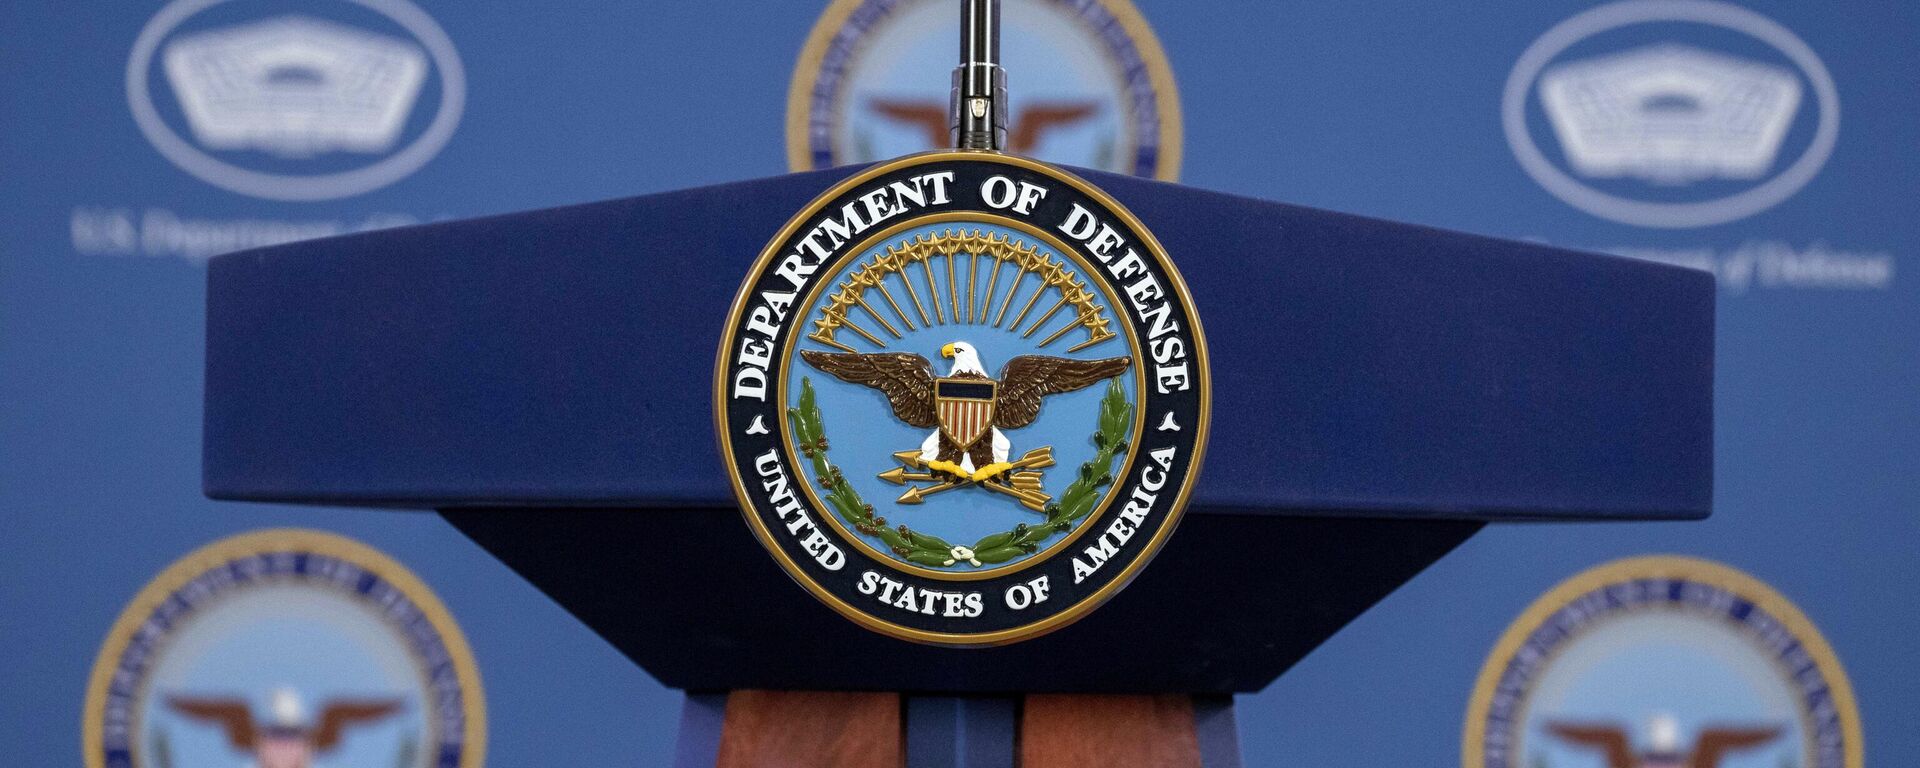 The Department of Defense Seal is seen on the podium before Pentagon spokesman U.S. Air Force Brig. Gen. Patrick Ryder speaks during a media briefing at the Pentagon, Friday, Feb. 24, 2023, in Washington. - Sputnik Africa, 1920, 22.10.2023